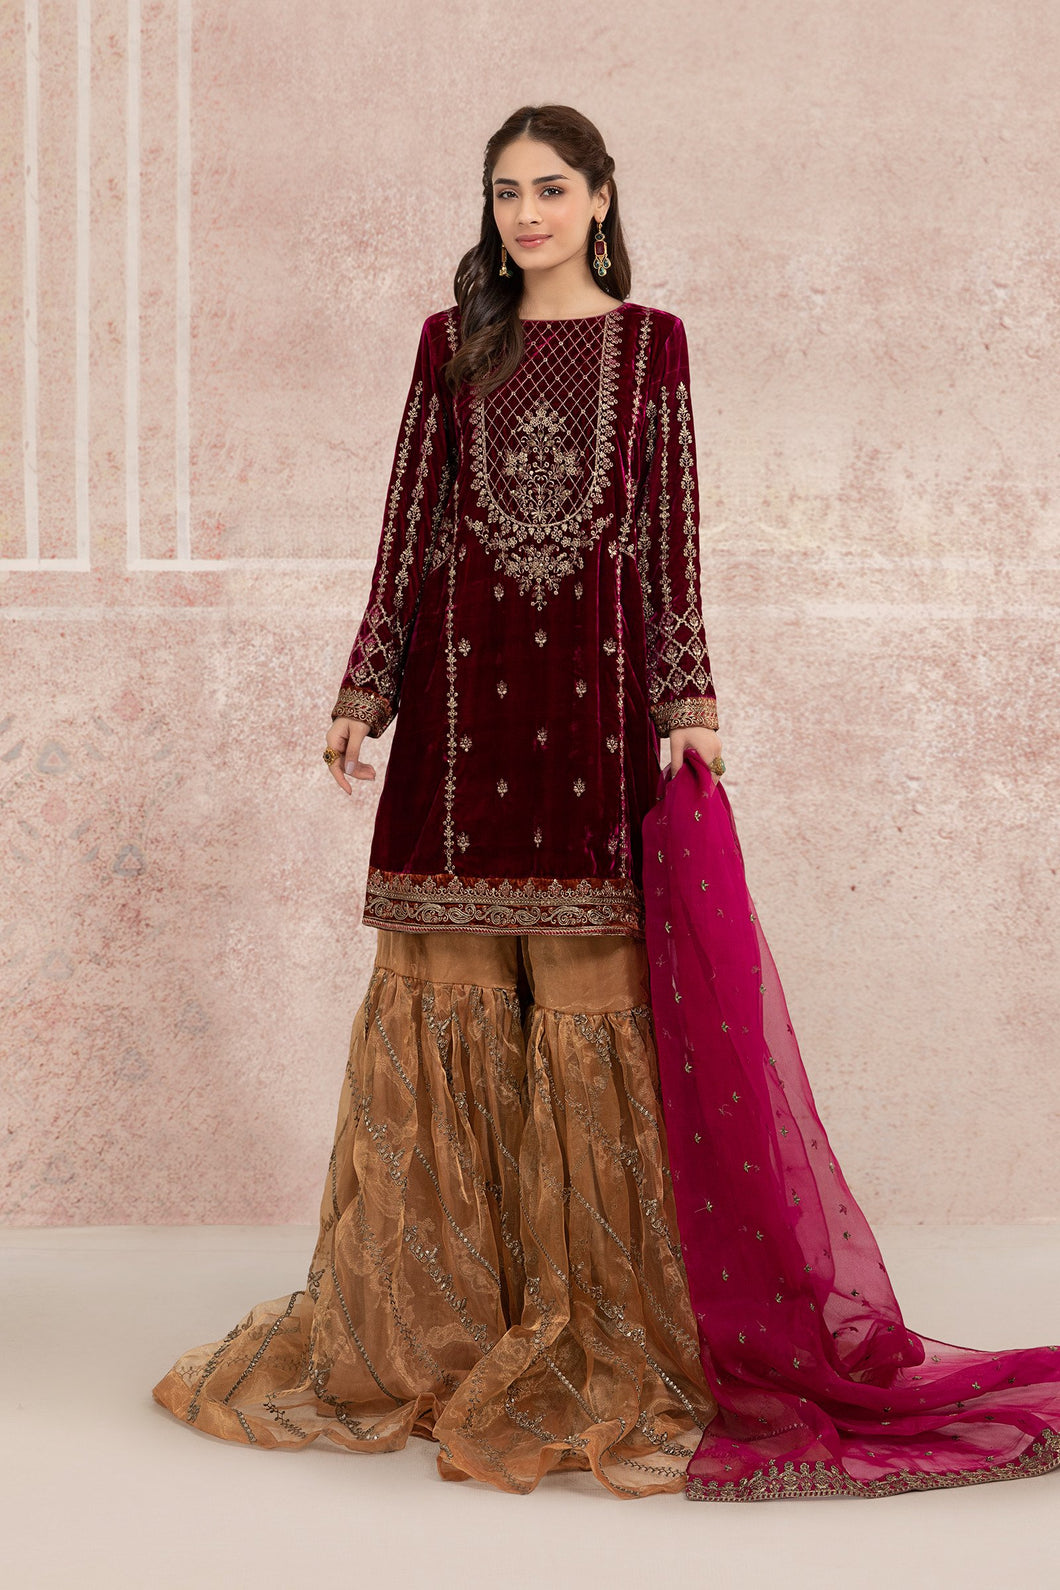 Buy Suit Pink SF-W21-11 Pink color Ready to Wear. READY MADE MARIA B BRIDAL COLLECTION UK 2021 Rejoice this season with balance of dynamic hues with  Pakistani Wedding designer clothes 2021 from the top fashion designer such as MARIA. B online in UK & USA Express shipping to London Manchester & worldwide 